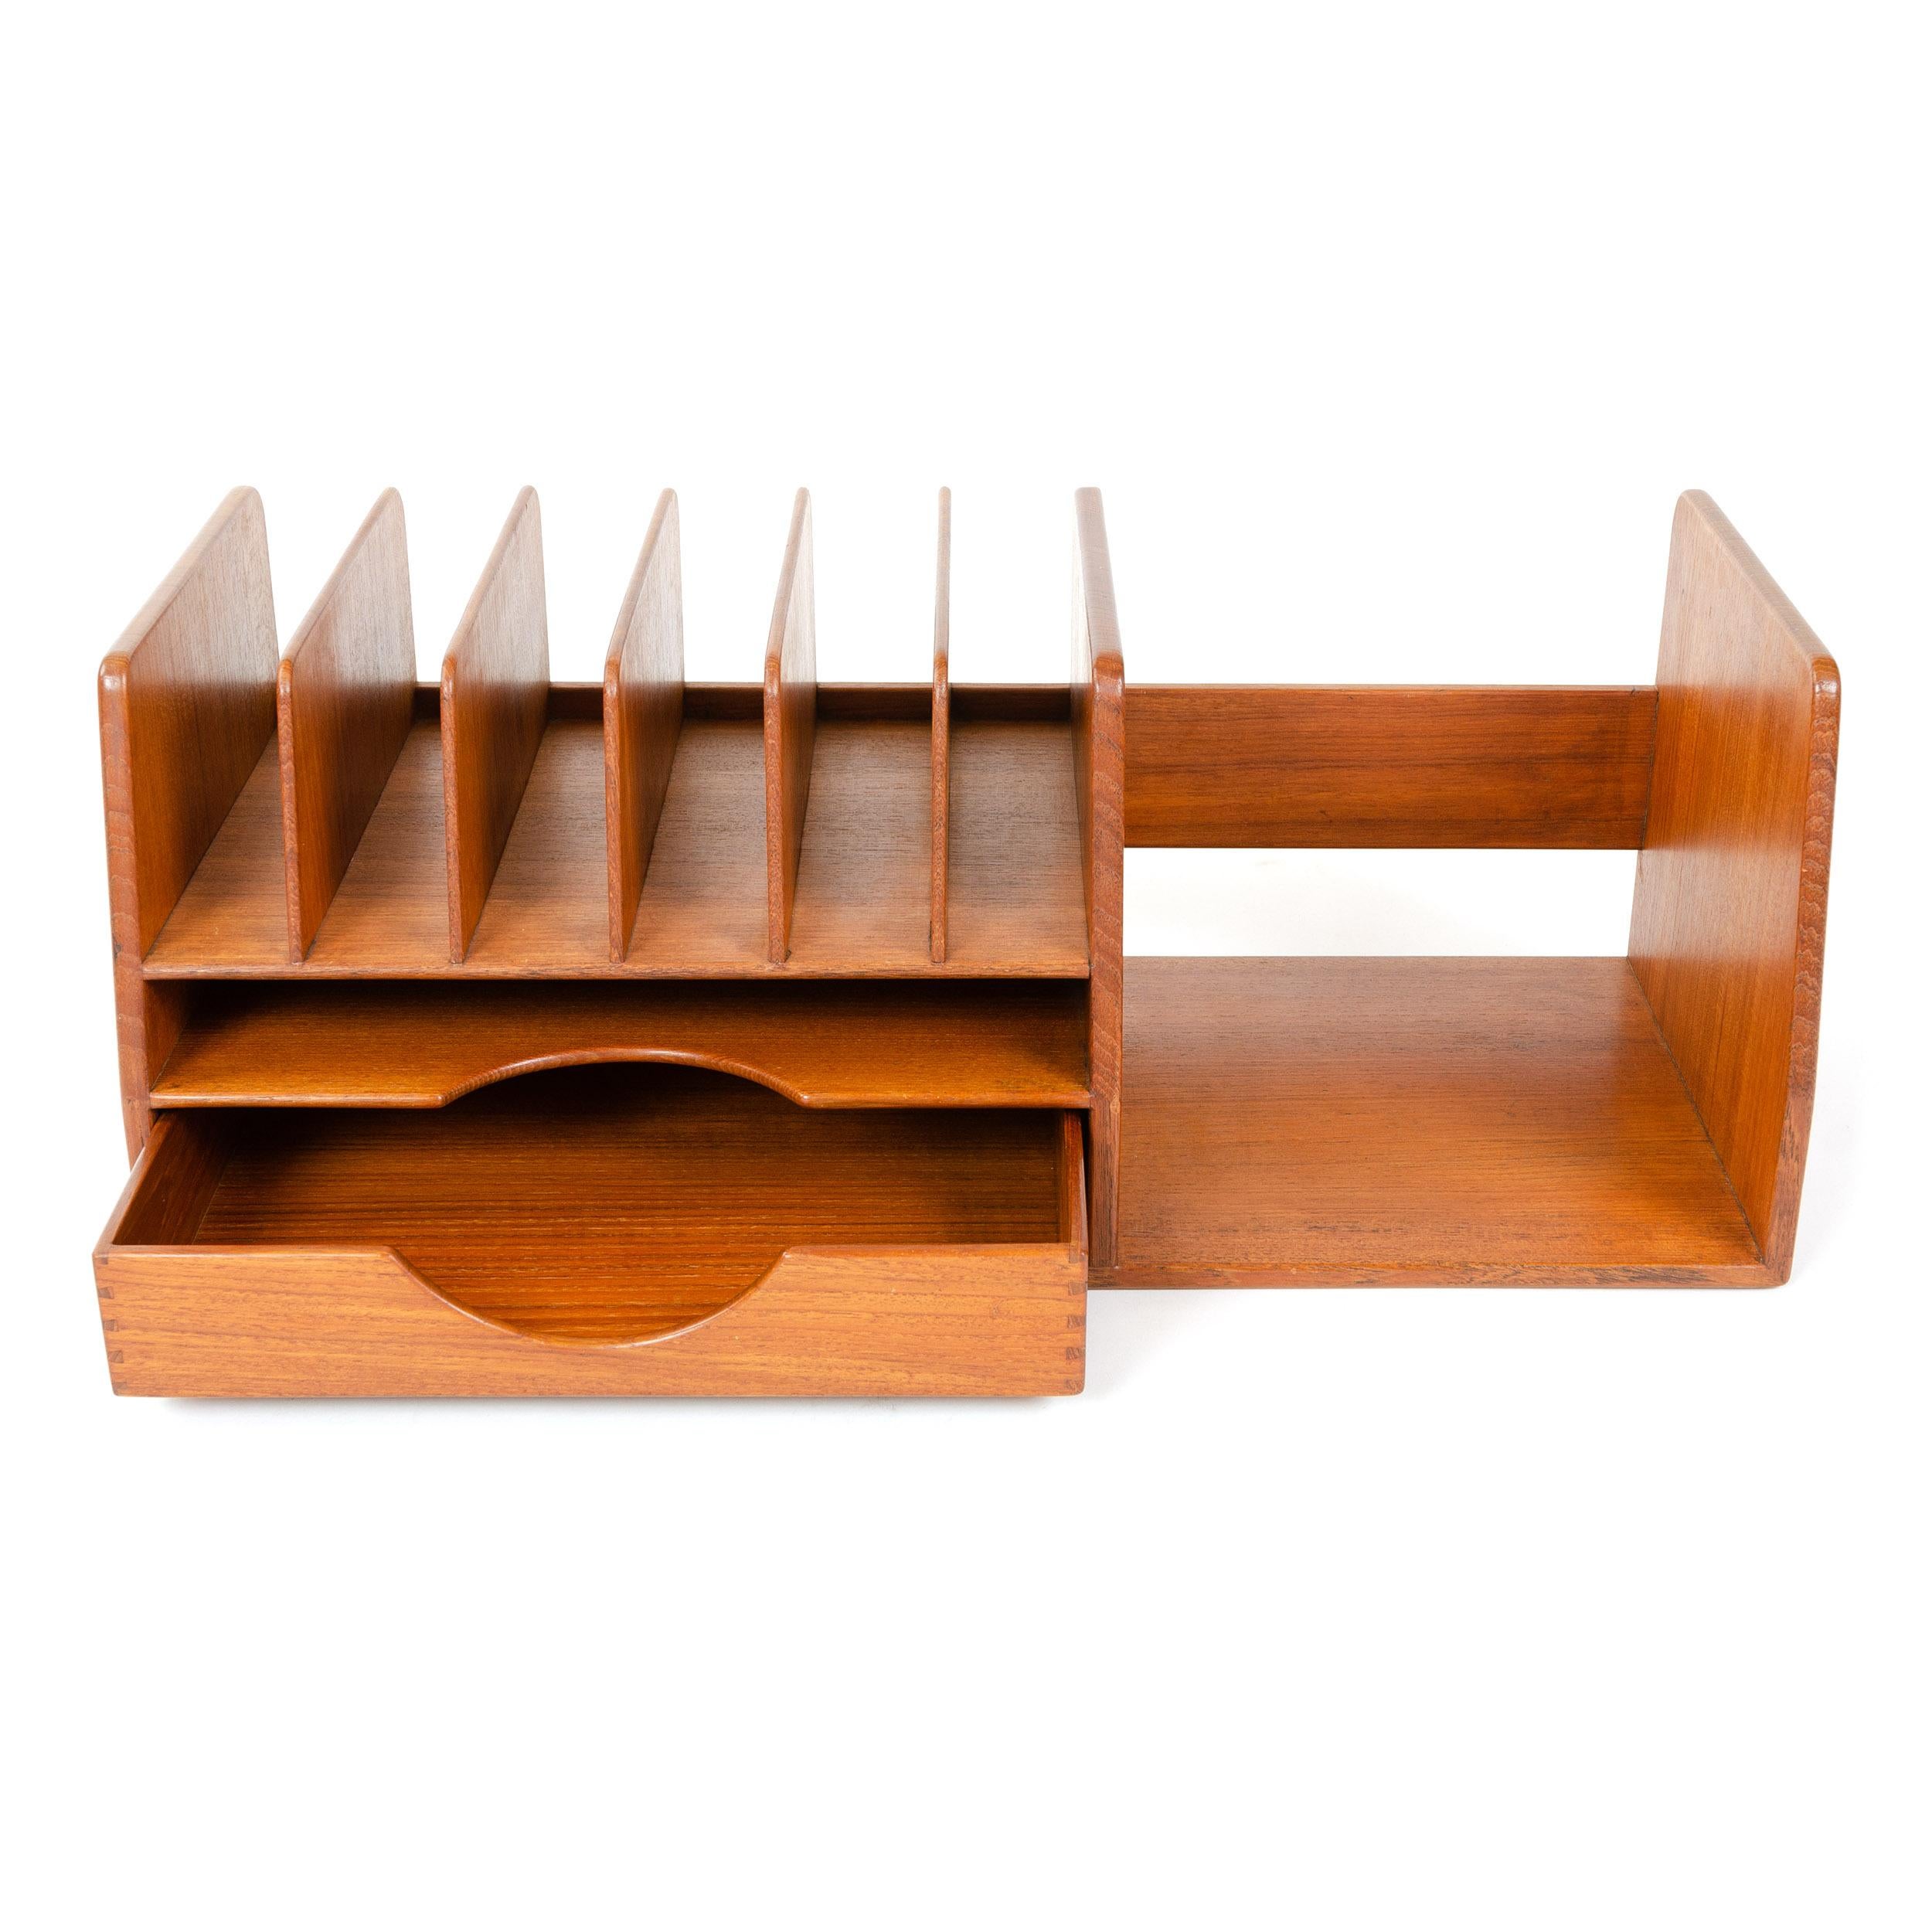 A bench-made solid teak desk organizer with dovetail joinery, comprising five correspondence dividers, a slim drawer and open storage.